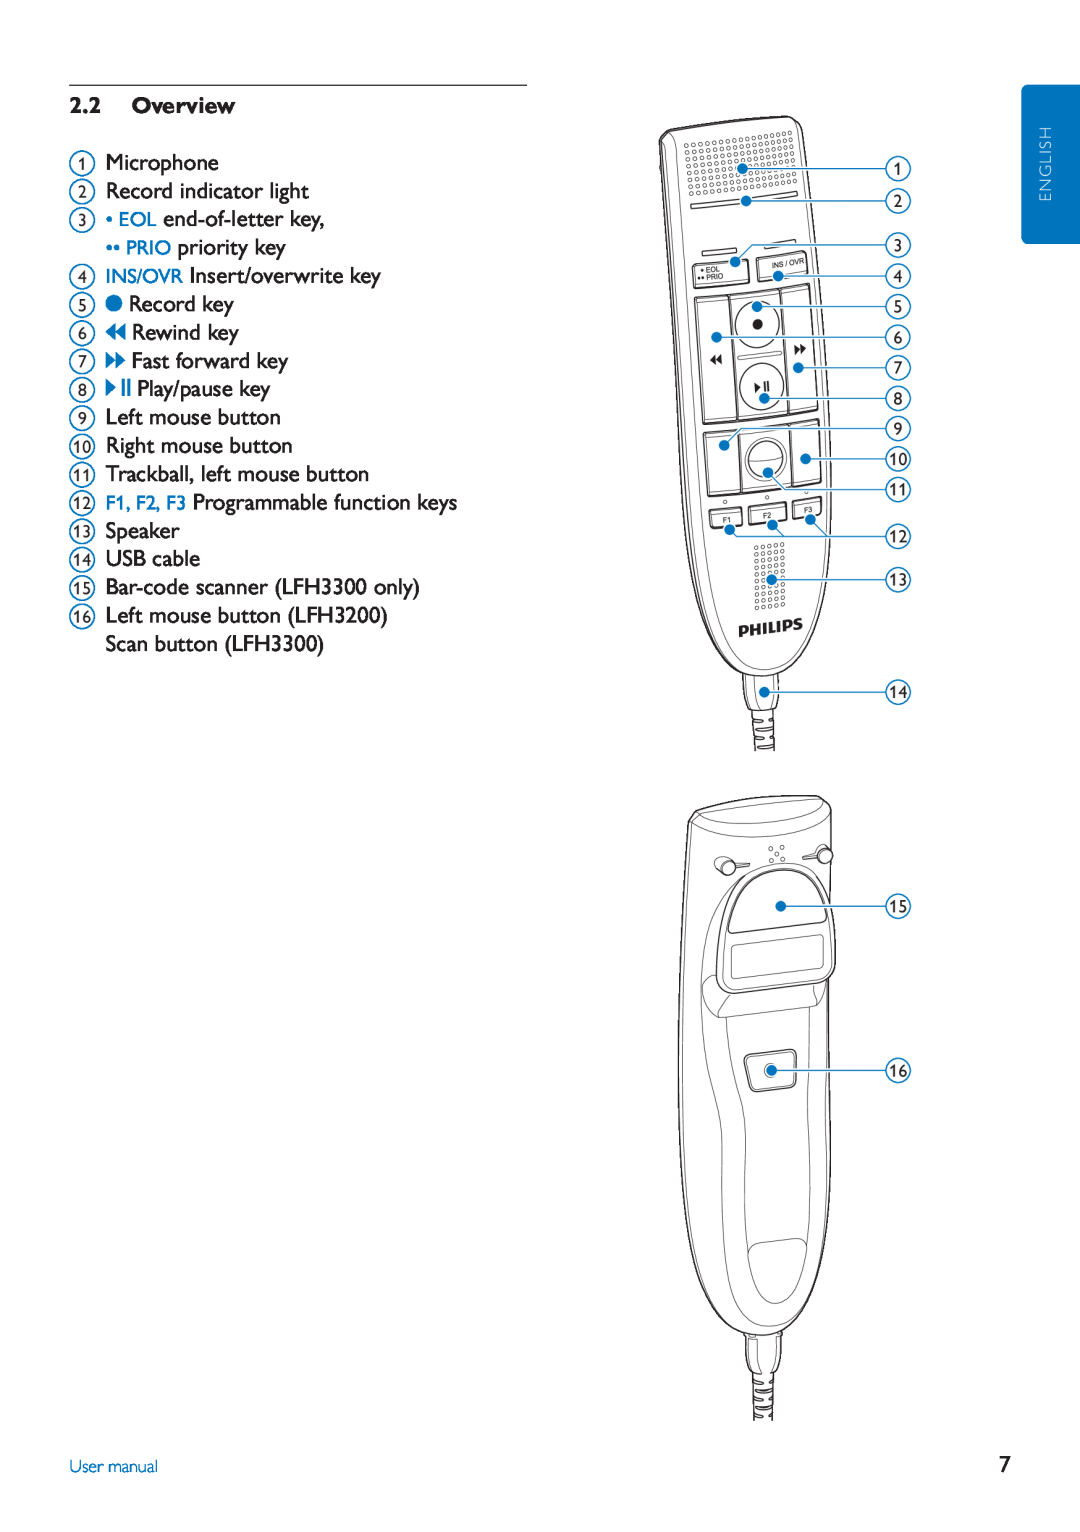 Philips LFH3200 user manual 2.2Overview 